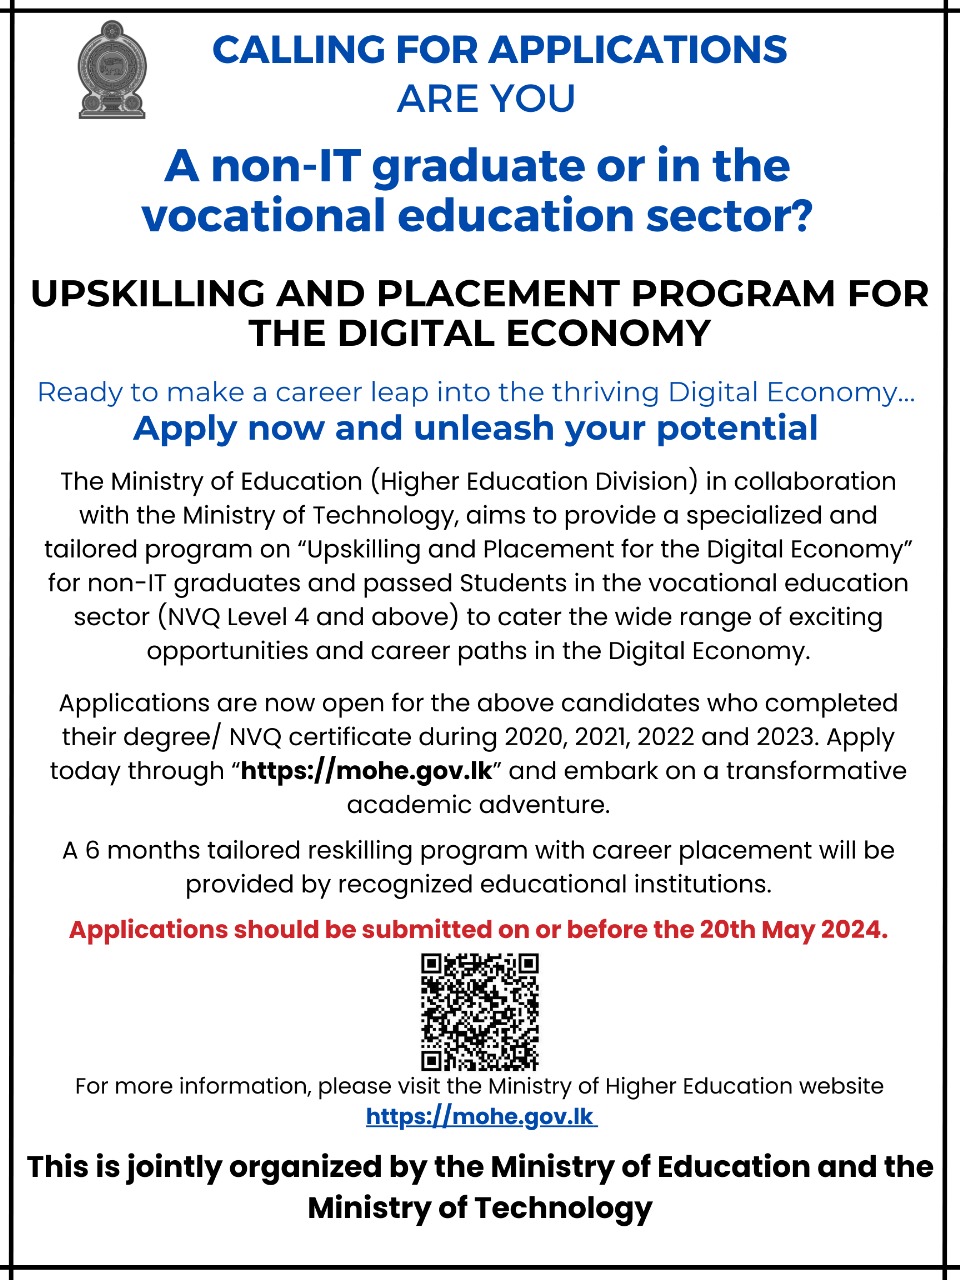 Upskilling and Placement for the Digital Economy